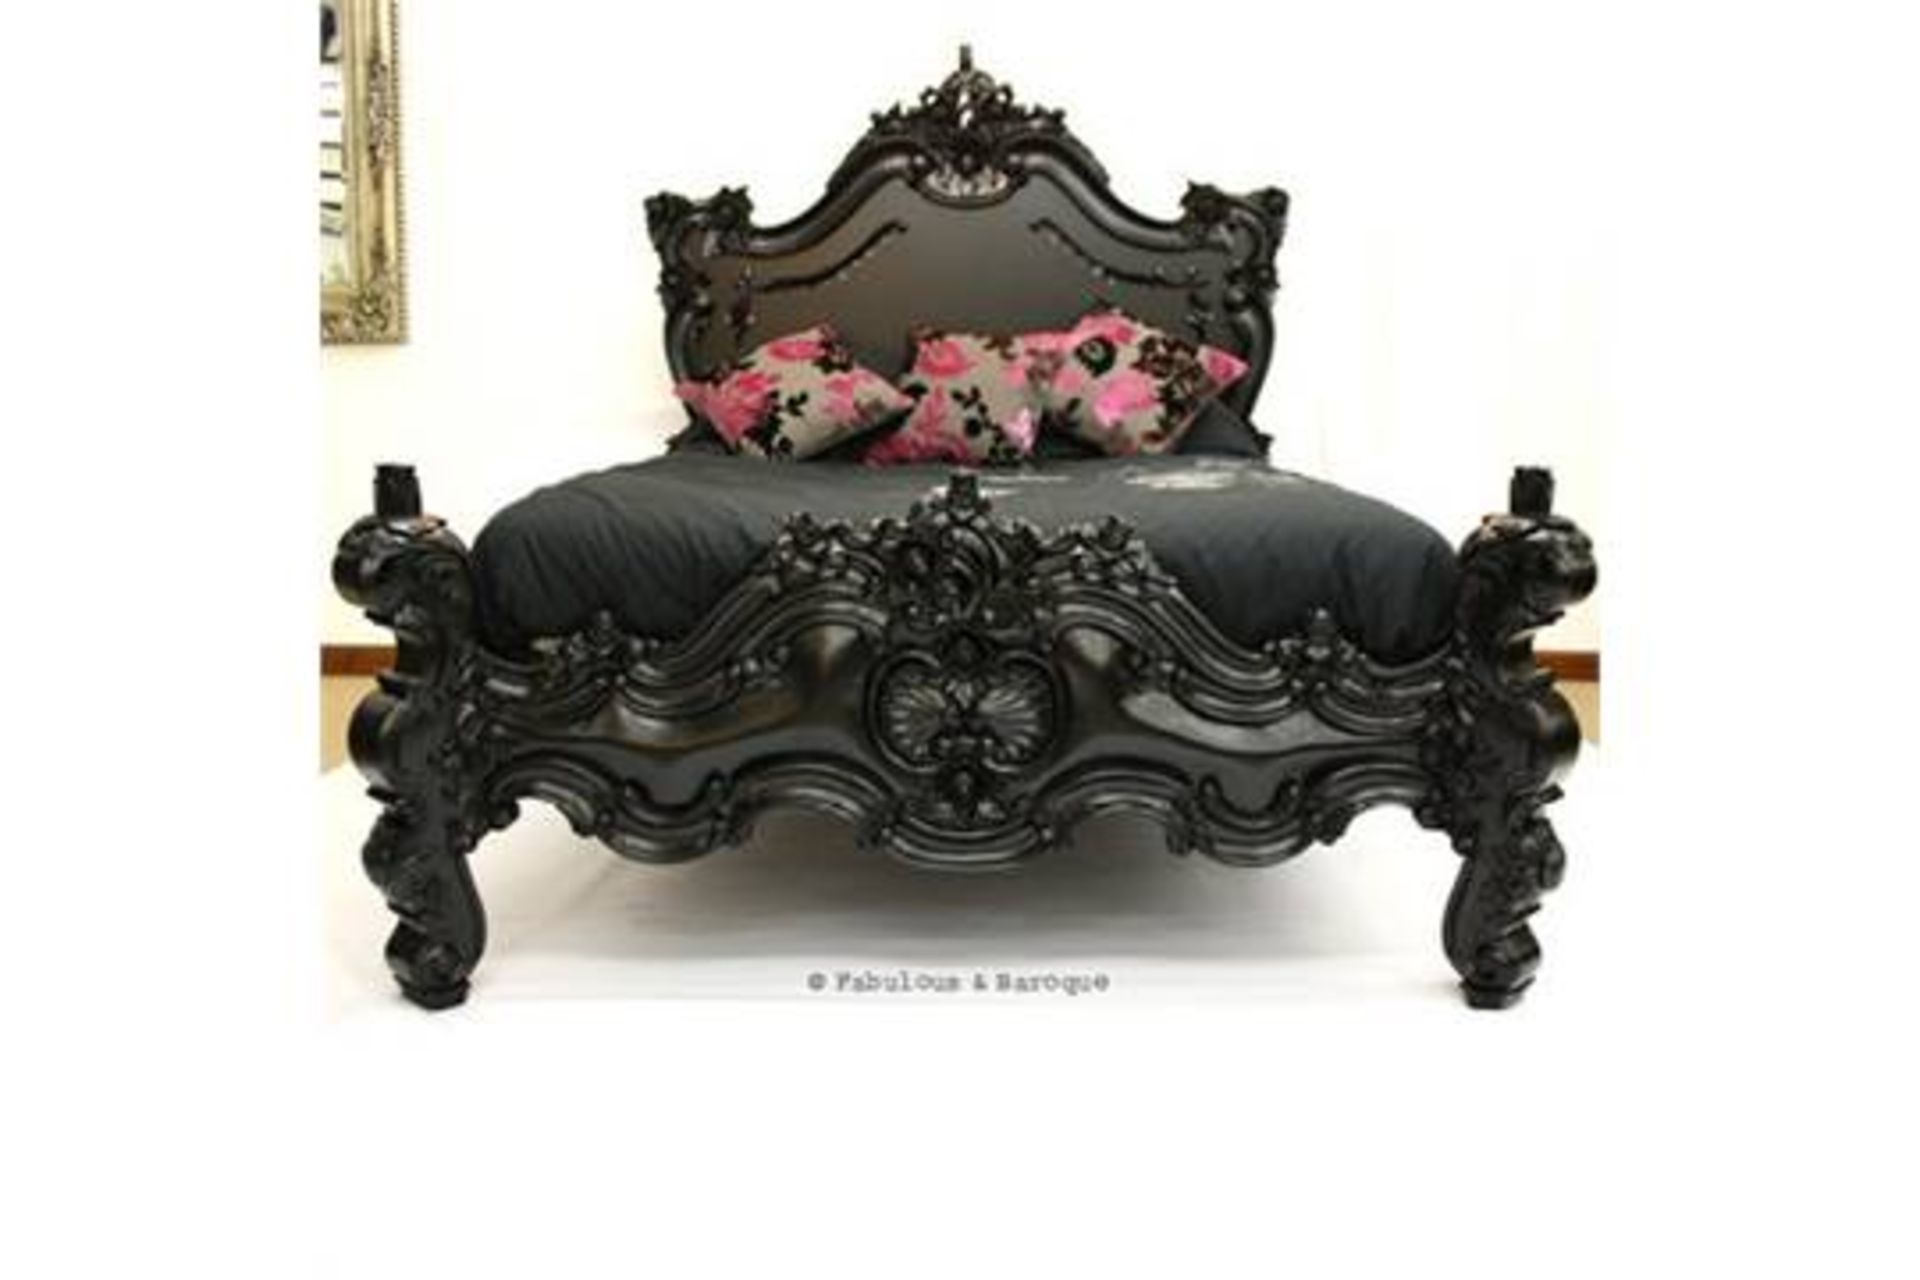 5ft  Double
Royal Fortune Montespan Bed - Black -  The Fabulous & Rococo Bed features
exaggerated